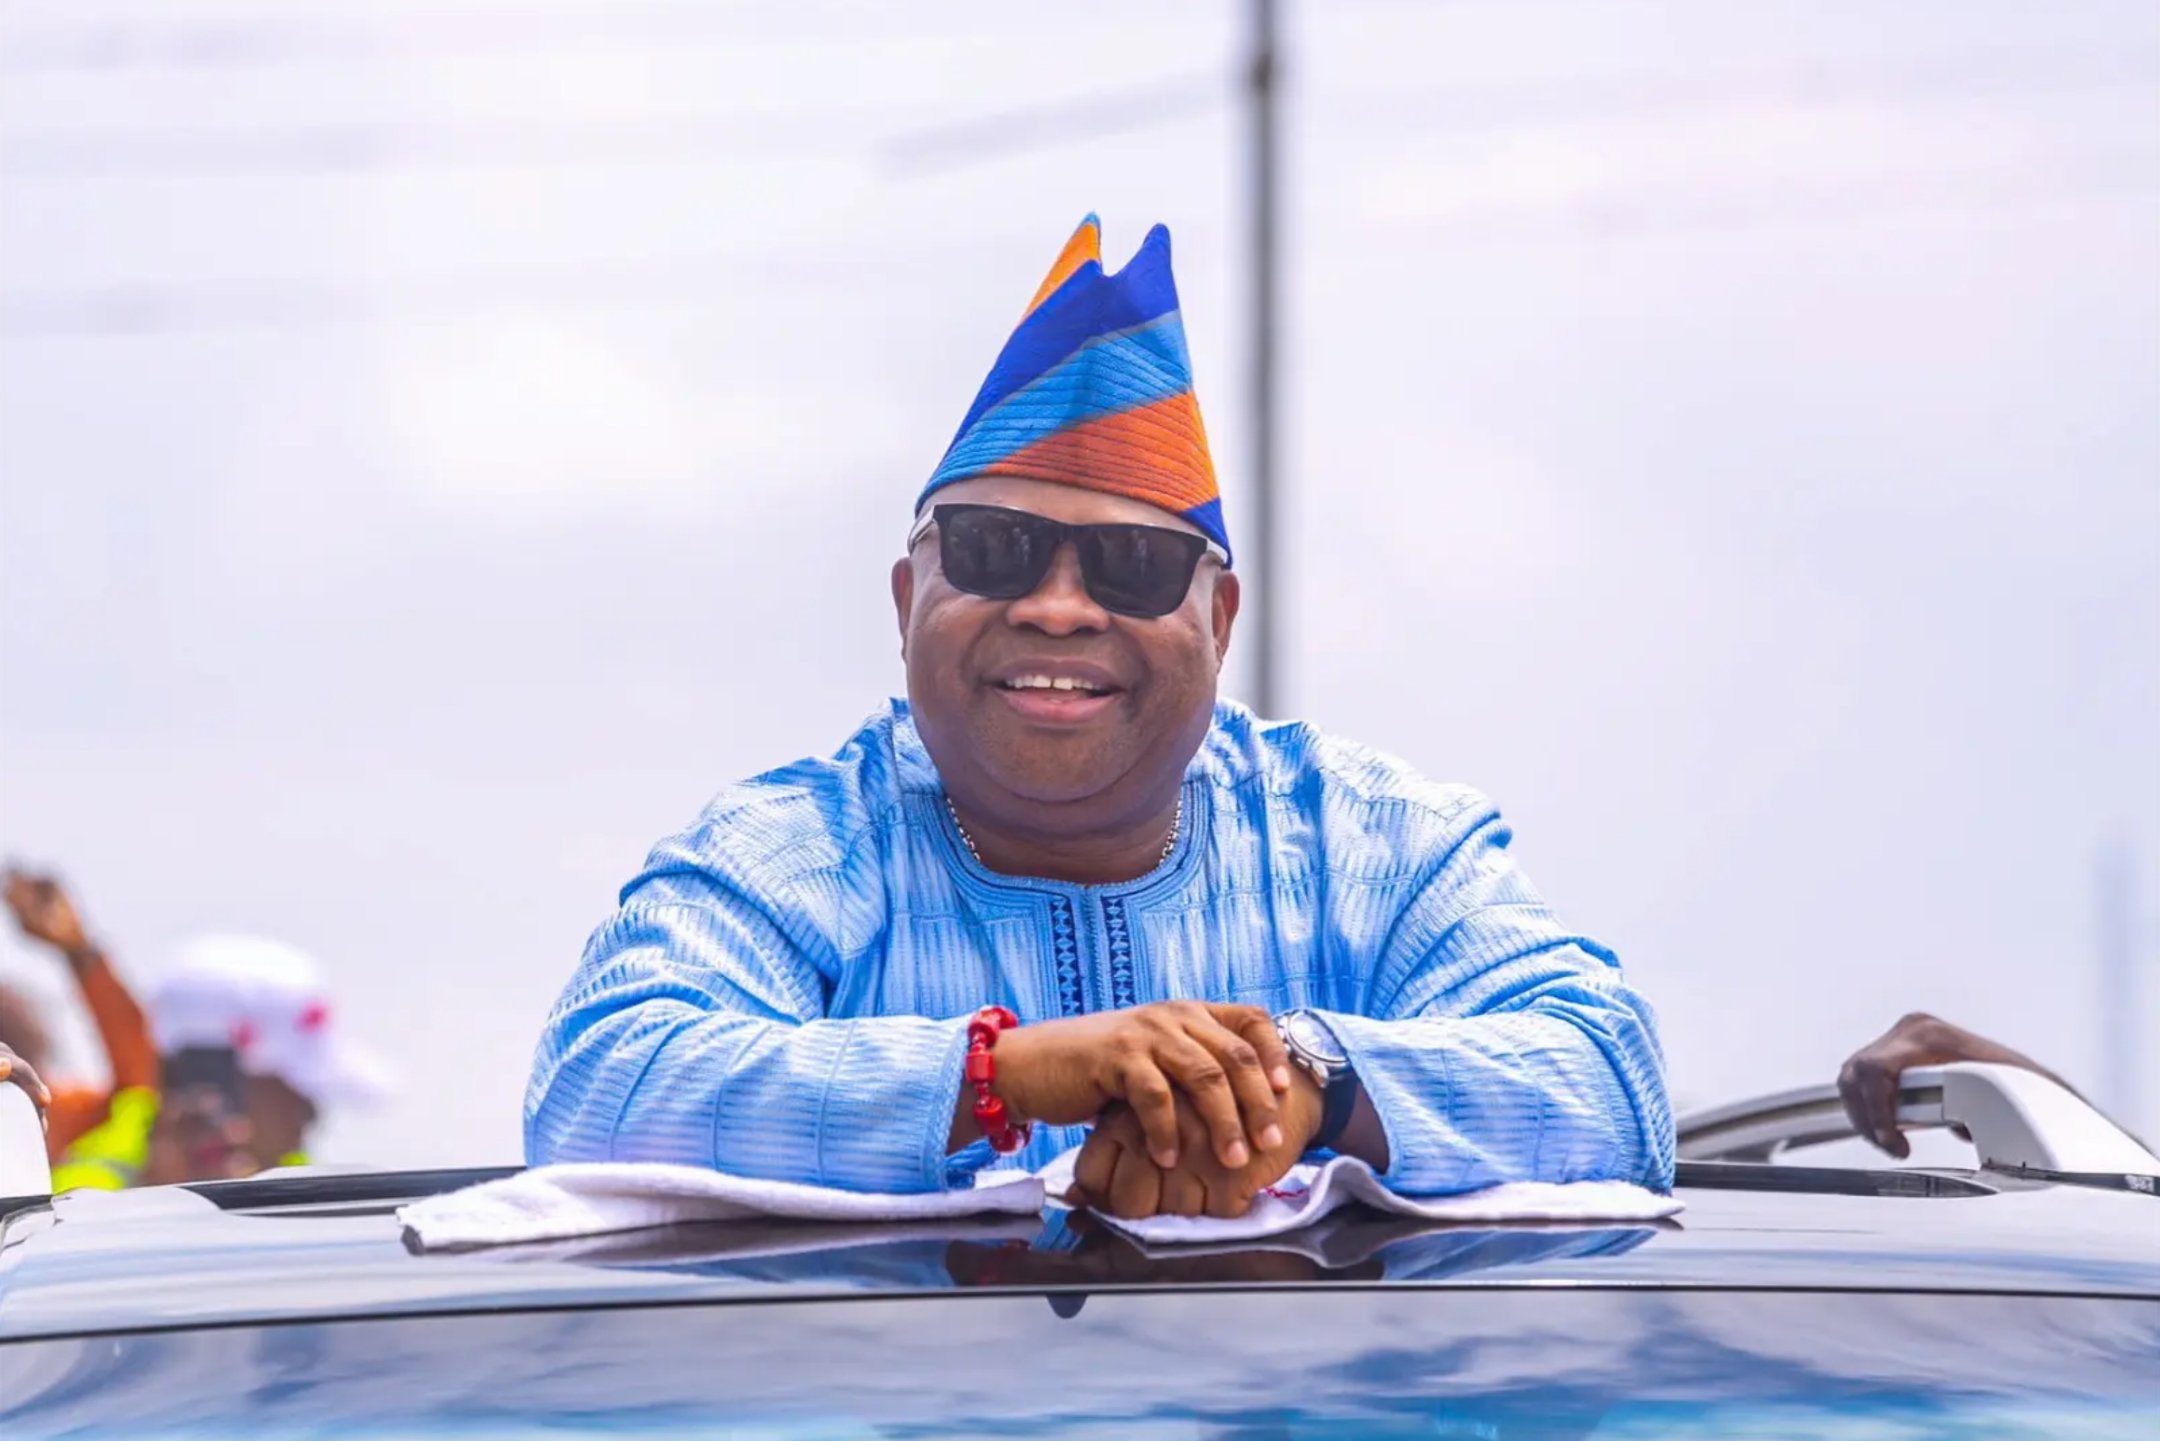 Osun Election Petition Tribunal nullifies Adeleke’s election; as Court throws out suit seeking Tinubu’s disqualification